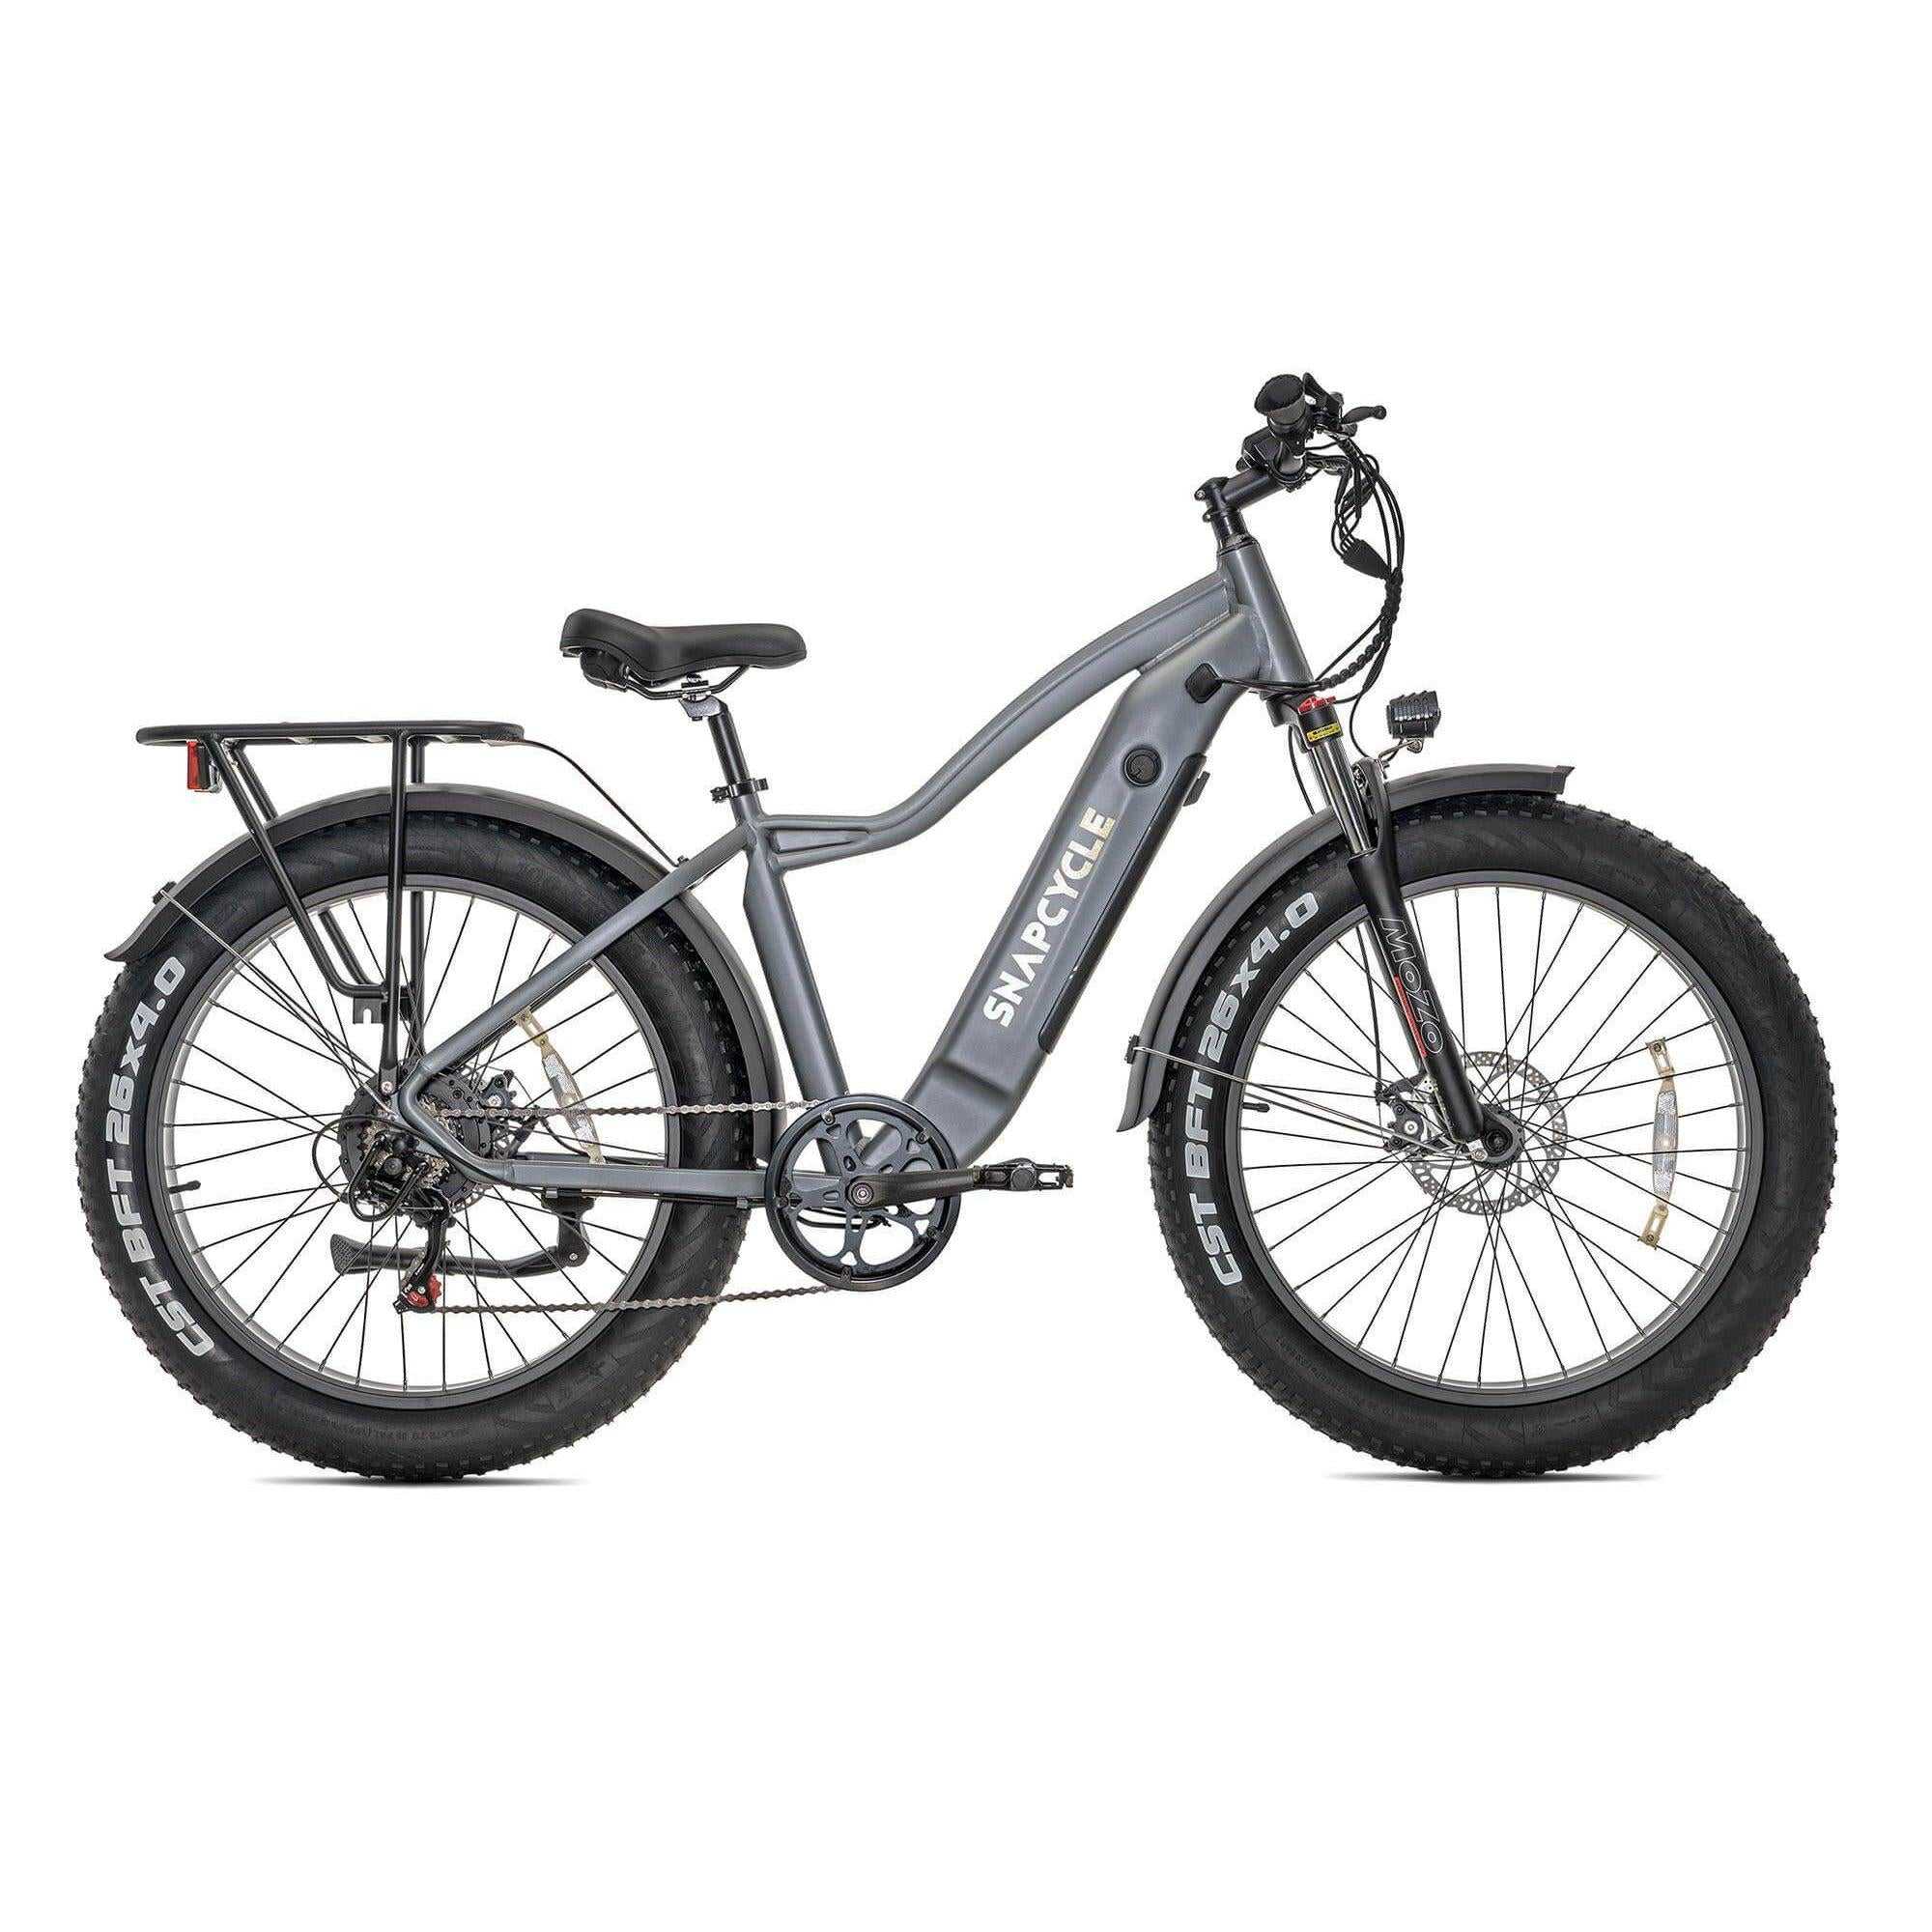 Snapcycle Electric Bikes: Fat Tire Ebikes At Affordable Prices